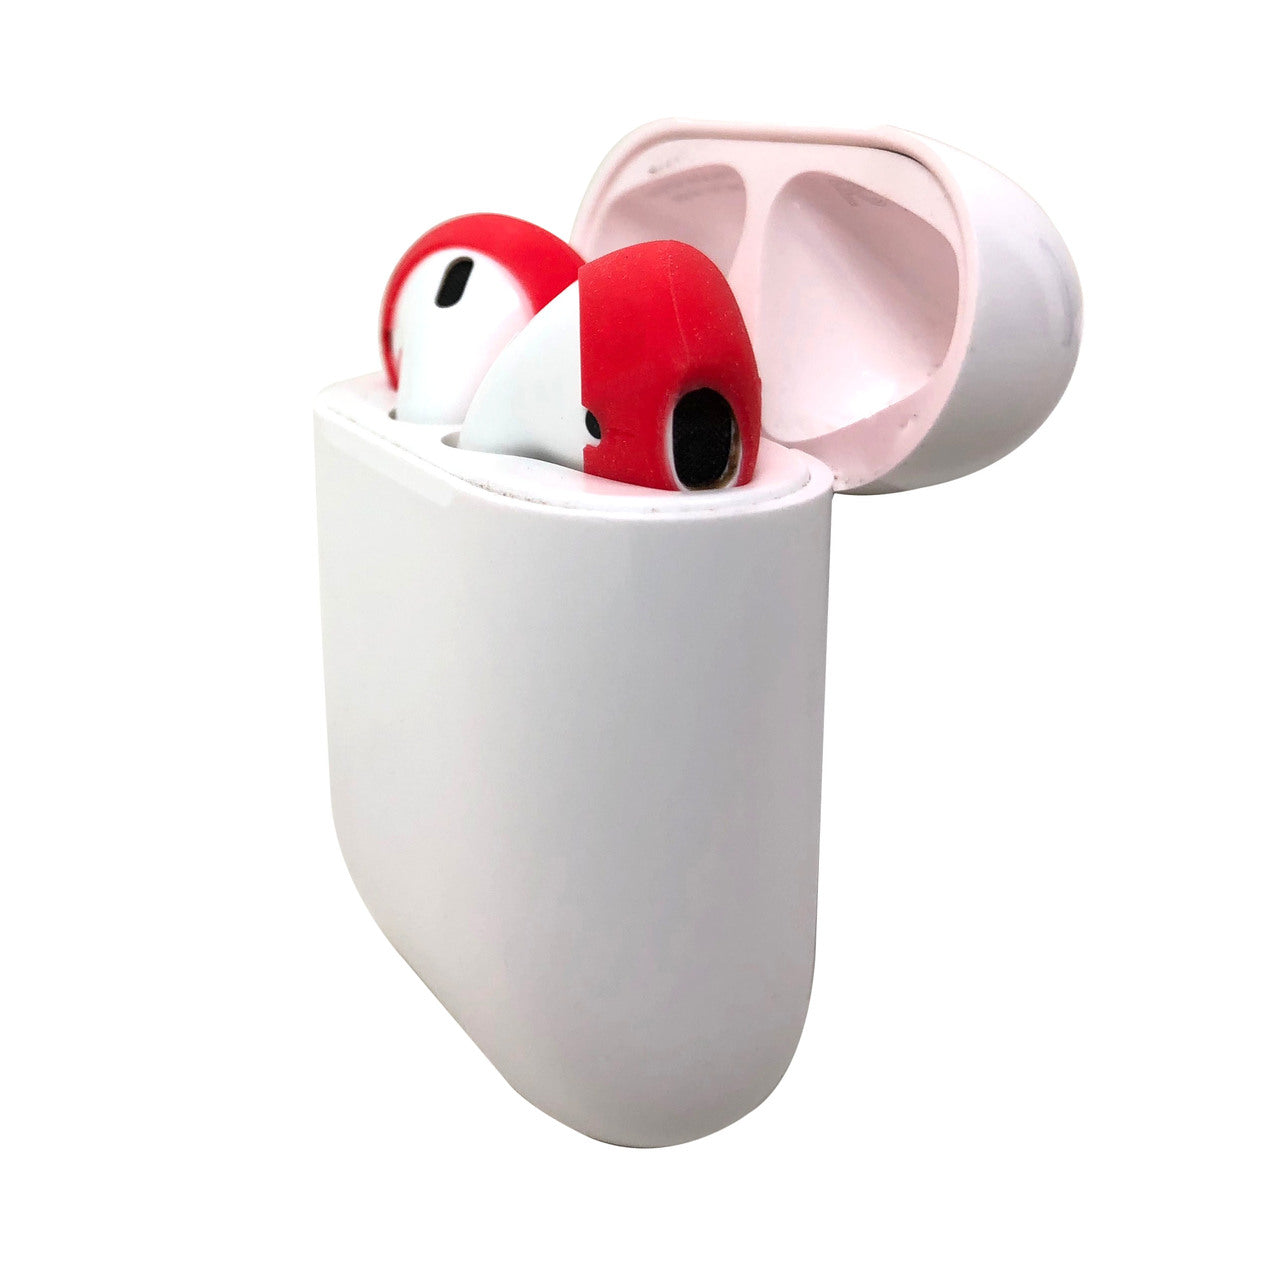 AERZ - AirPods & Apple Earbuds Skins Covers

* AERZ is a simple comfortable AirPod and Apple Earbud 2.0 solution that improves the sound quality and comfort of your Apple AirPods and Apple Earbud 2.0
    * Soft high quality silicone cover skins improve the comfort of Apple AirPods and Apple Earbuds 2.0 allowing you to wear your AirPods or Earbuds for hours on end without discomfort
    * AERZ dramatically improves the audio quality of Apple AirPods and Apple Earbuds 2.0 by air sealing AirPods and Earbuds to